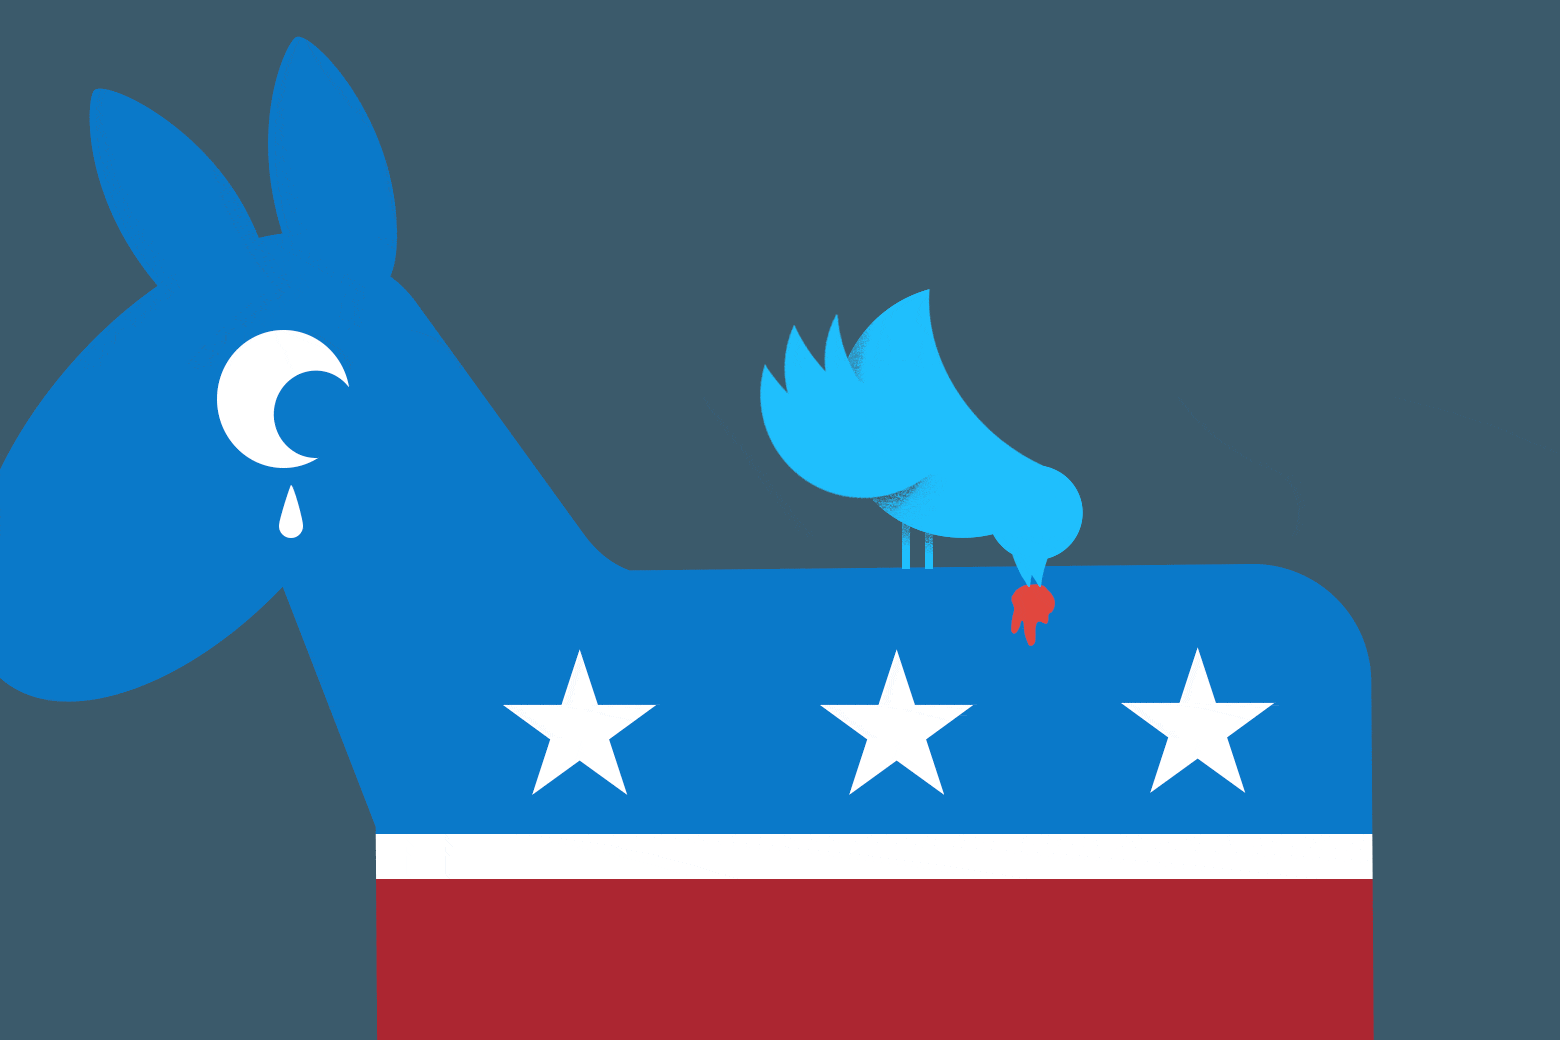 The Twitter bird pecking at the back of a Democratic donkey with U.S. flag colors